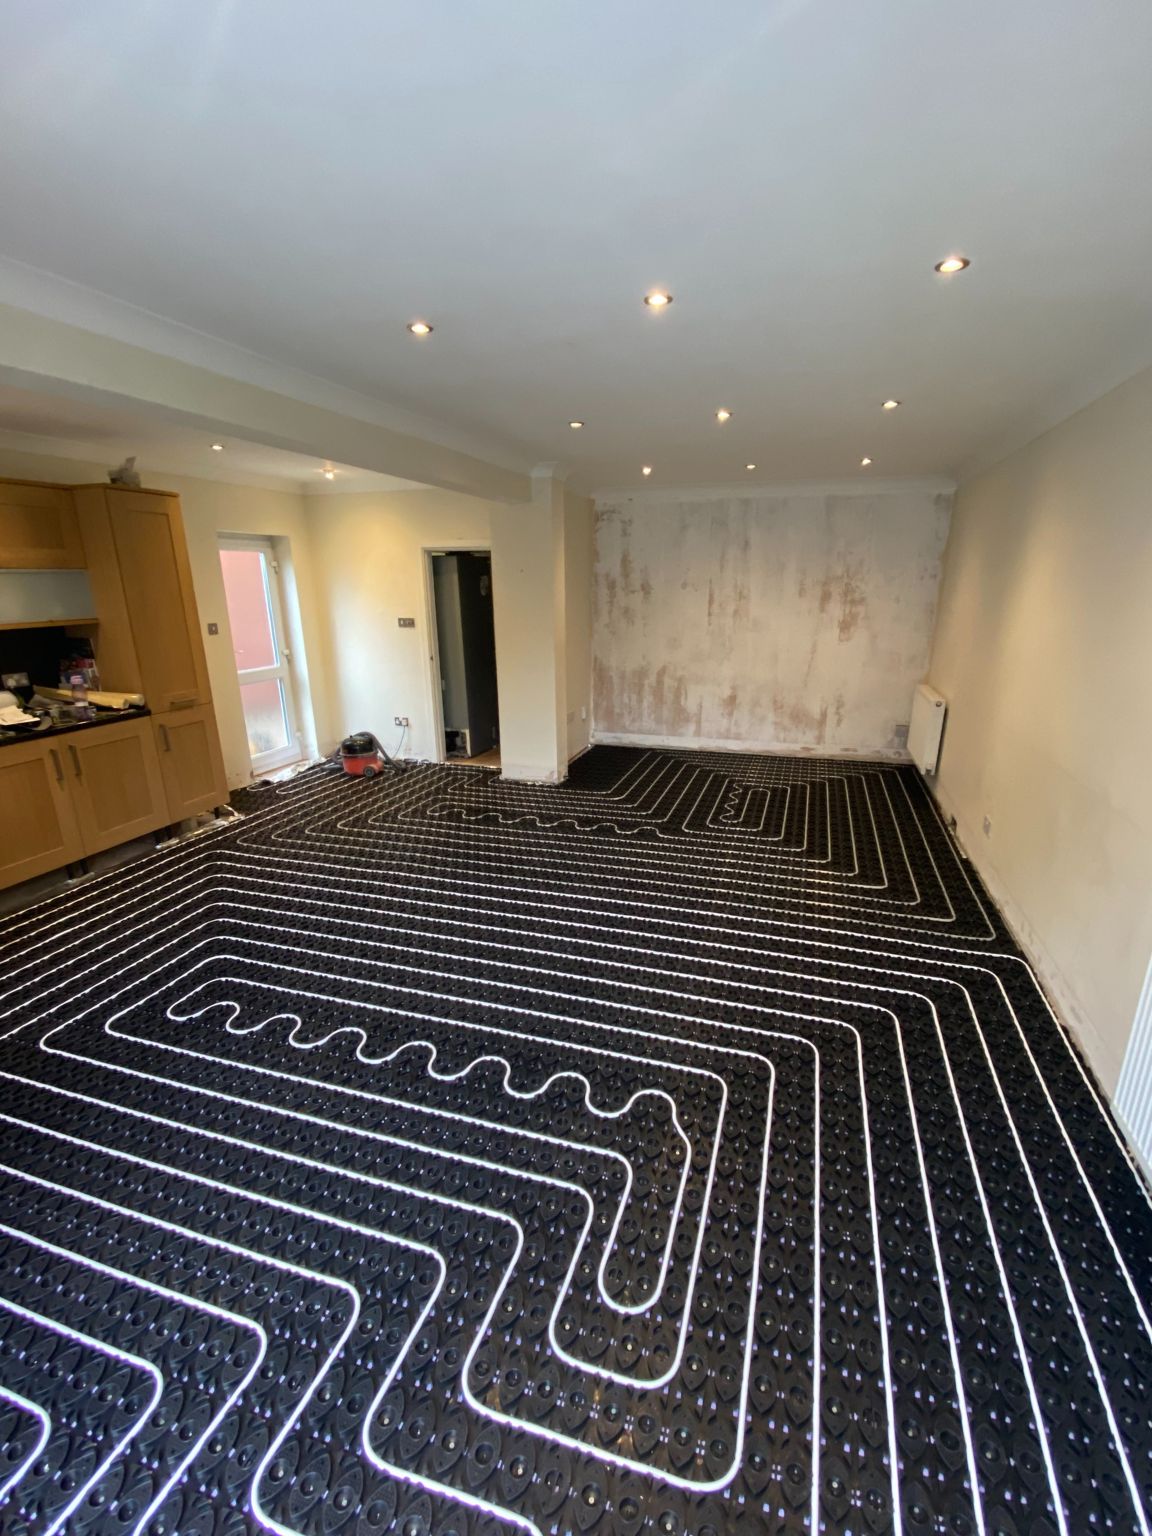 Low profile underfloor heating system connected to the old Worcester boiler